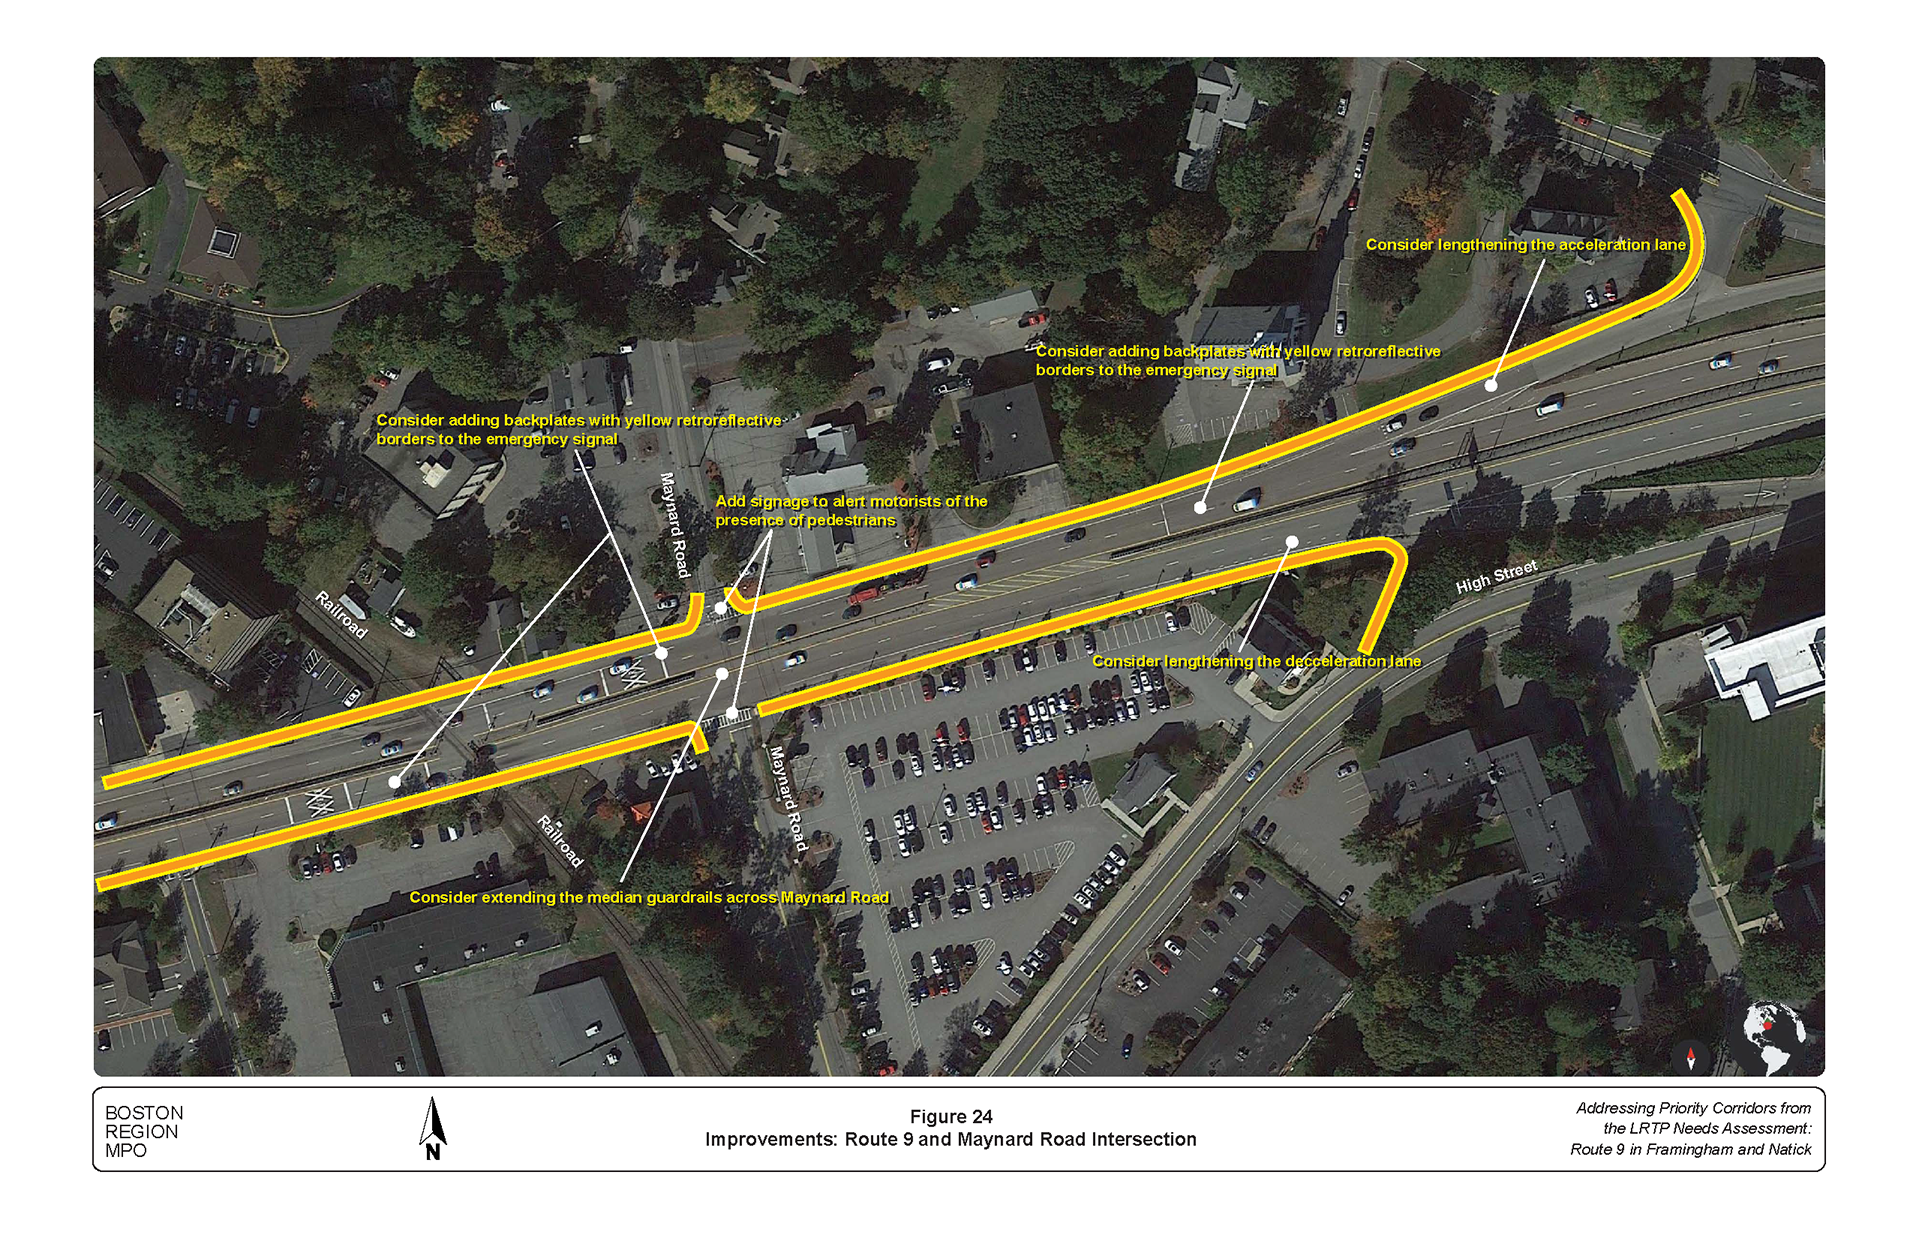 Figure 24 is an aerial photo showing the intersection of Route 9 and Maynard Road and the improvements